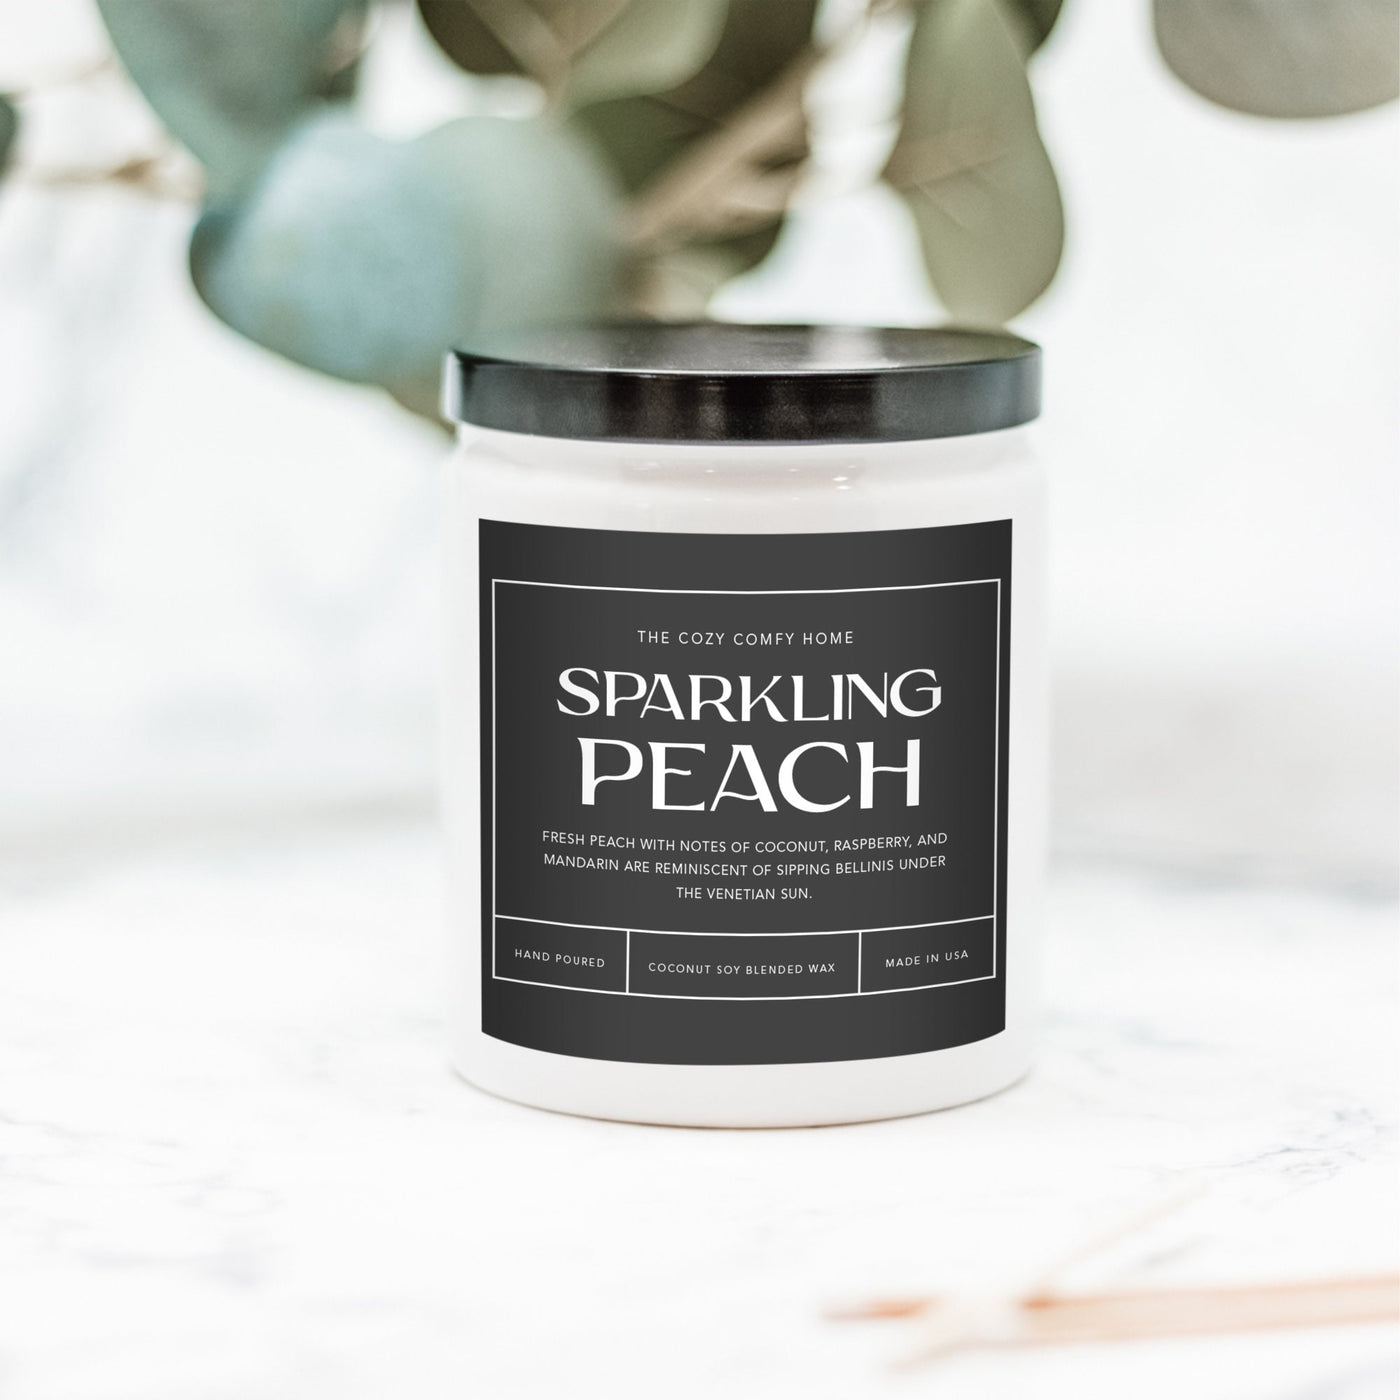 Sparkling Peach hand poured candle, Scented Nontoxic Candle, 8 oz coconut soy wax candle, Black or White ceramic jar, Wholesale Available